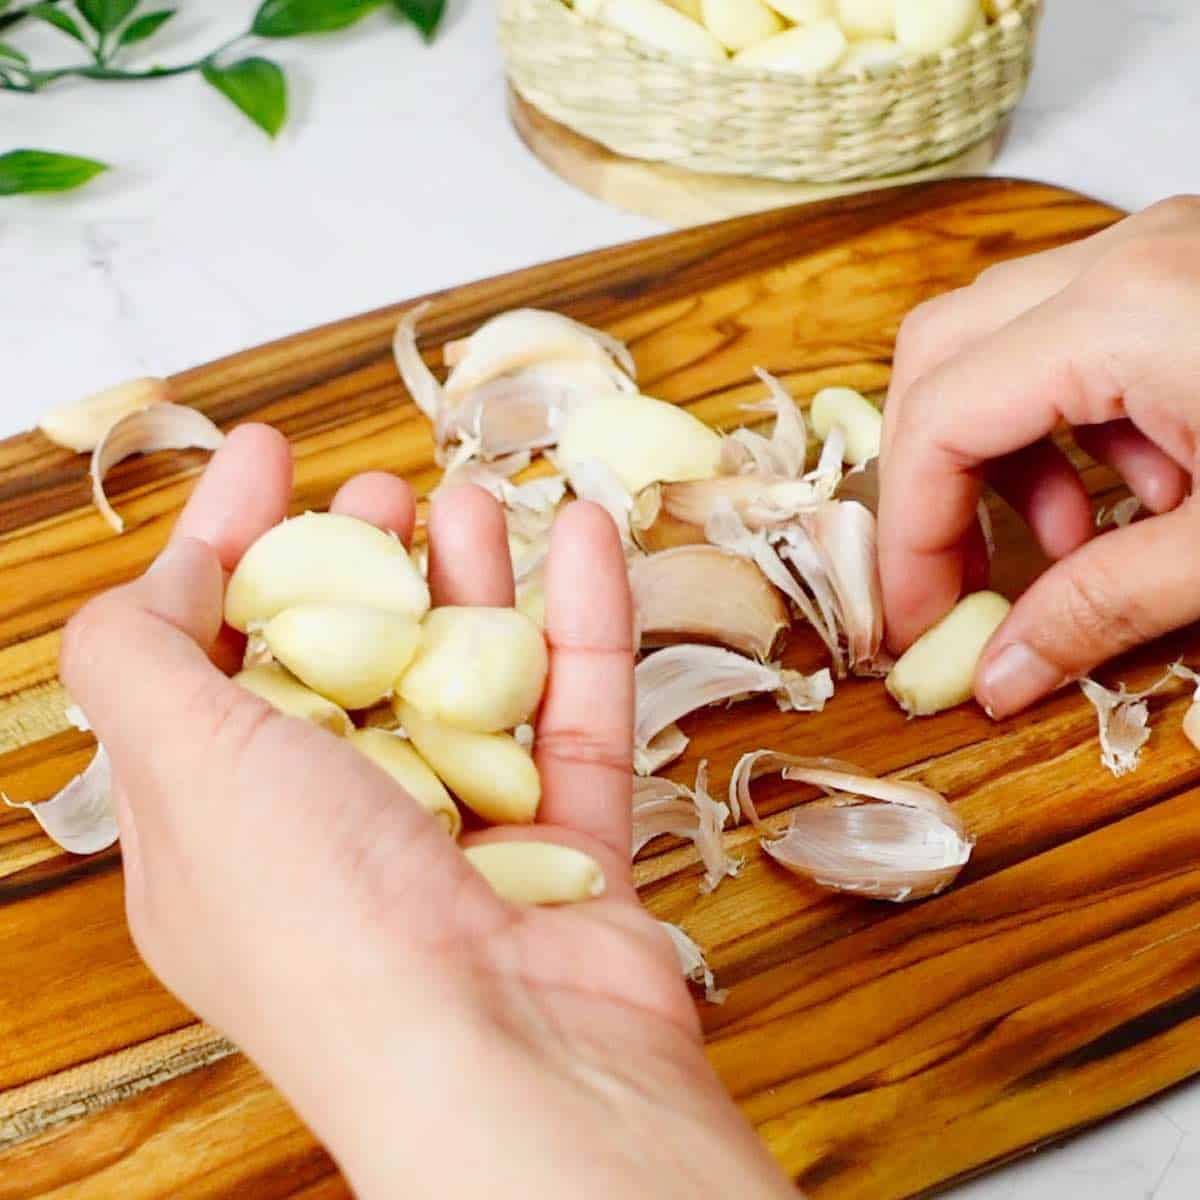 Picking out peeled cloves of garlic.